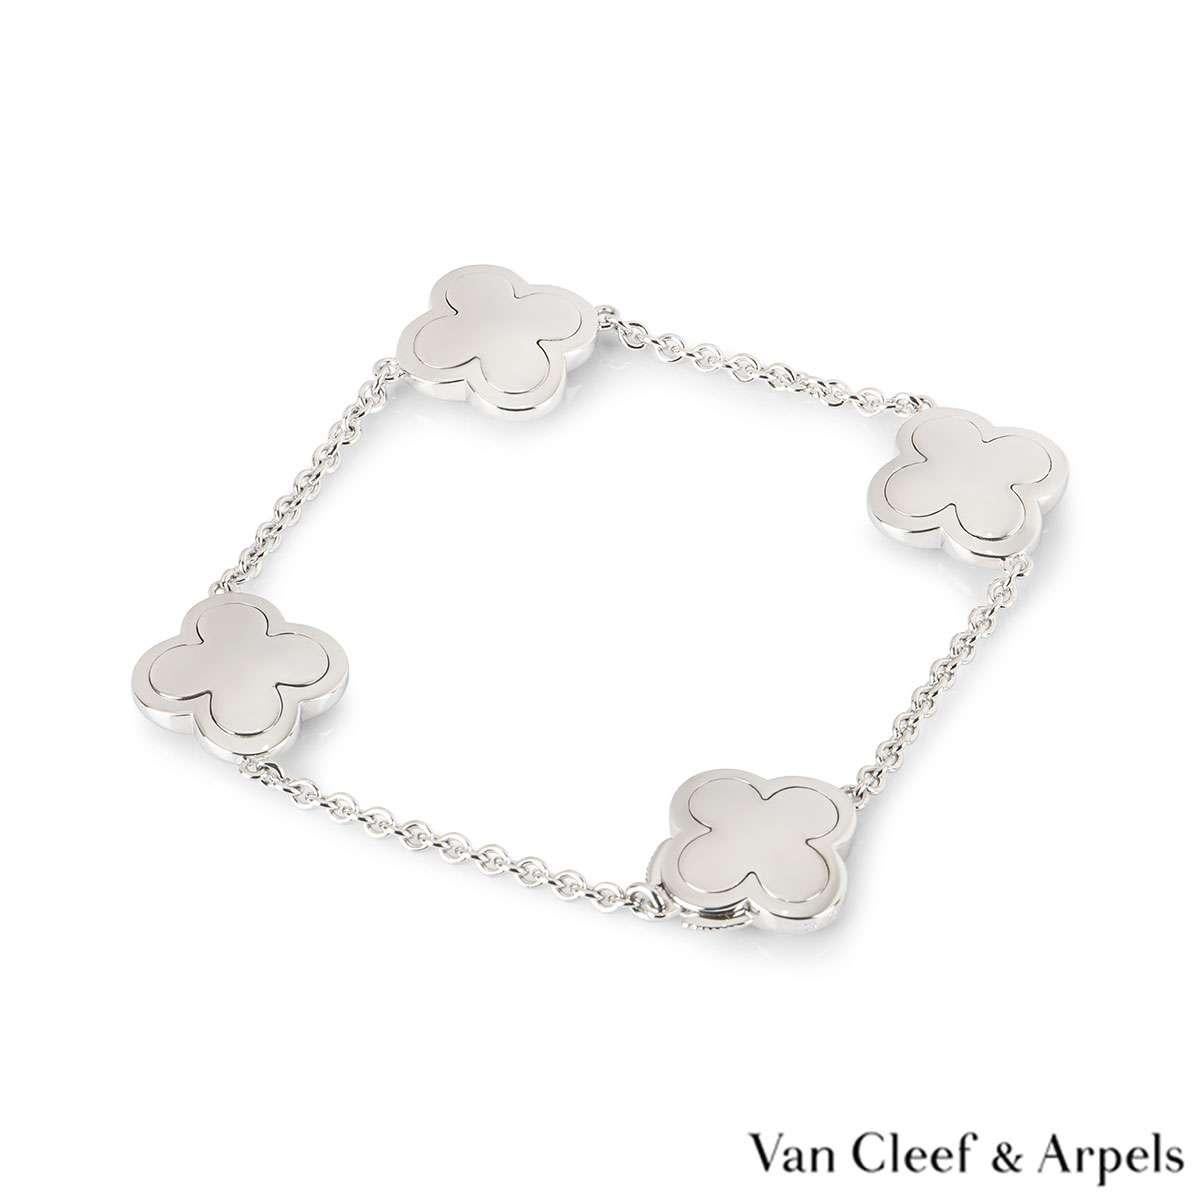 An iconic 18k white gold bracelet by Van Cleef & Arpels from the Alhambra collection. The bracelet consists of 4 iconic four leaf clover motifs in polished white gold set throughout the chain. The bracelet measures 7 inches in length and is complete